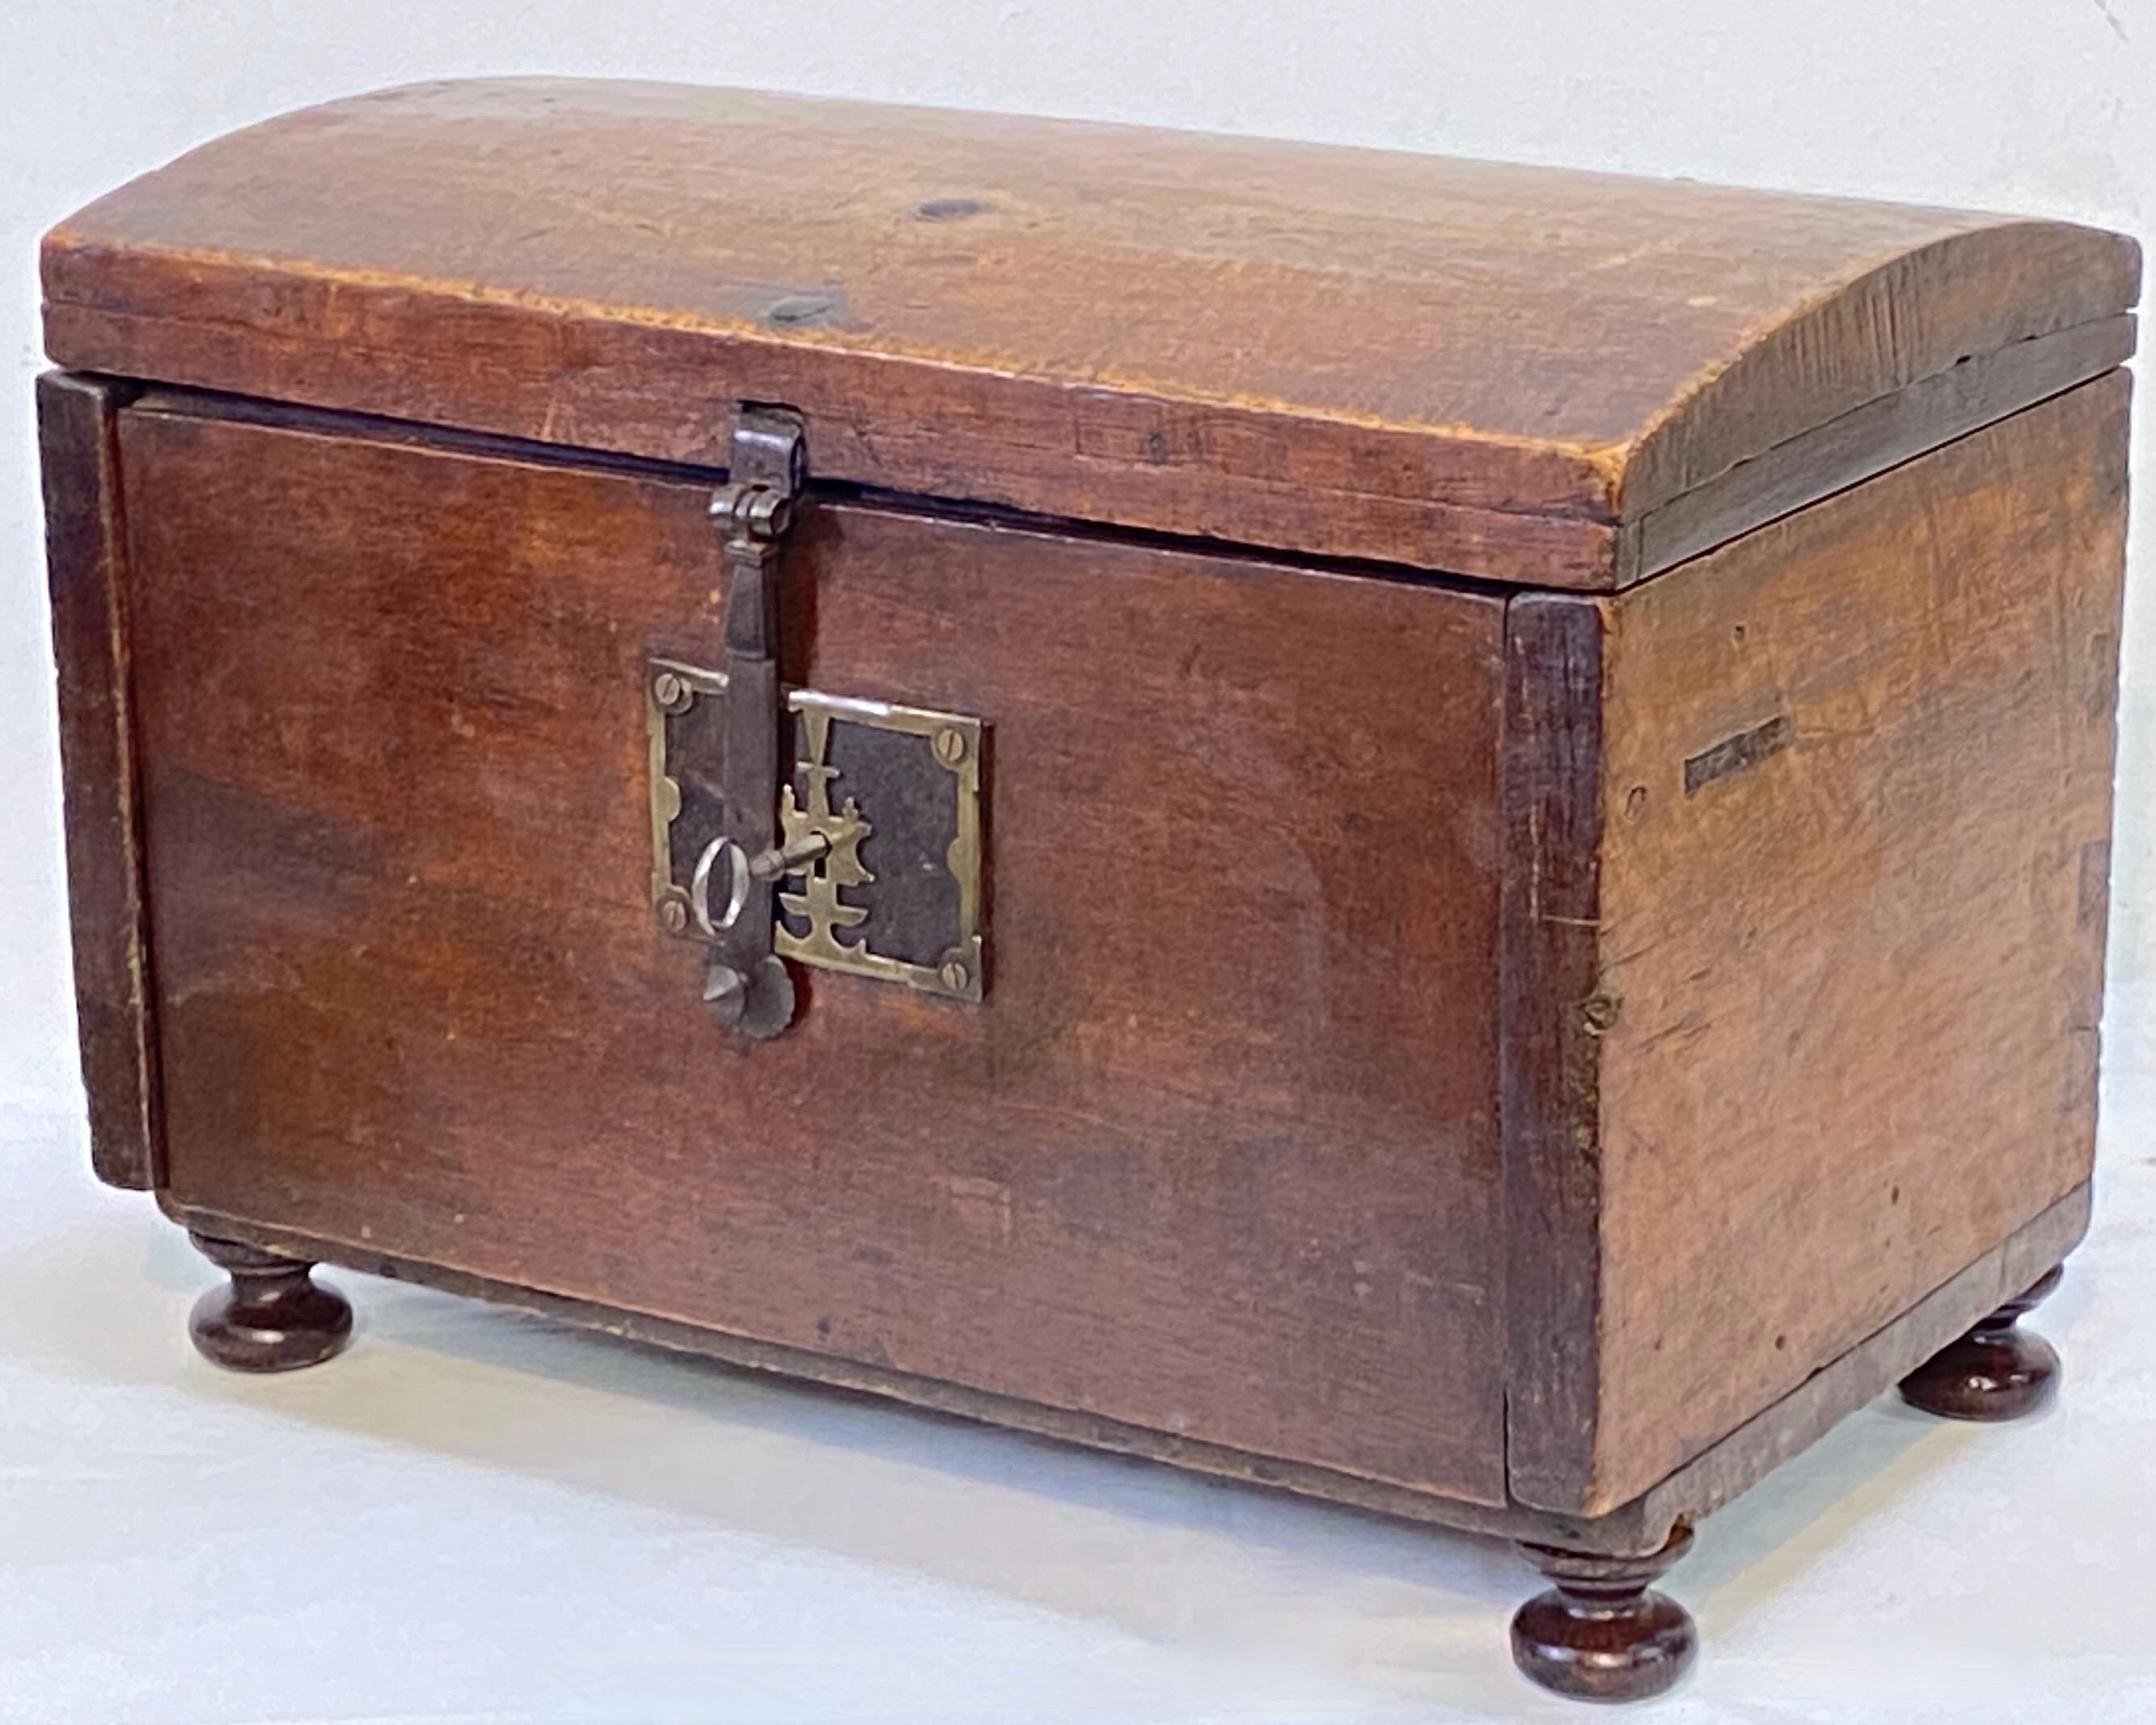 Carved hardwood (possibly walnut) storage box with fitted multi drawer interior.
Old stain and wax finish. Having a functional lock with key.
The pad feet are not original.
Wonderful antique condition with excellent character.
Mexico, 19th